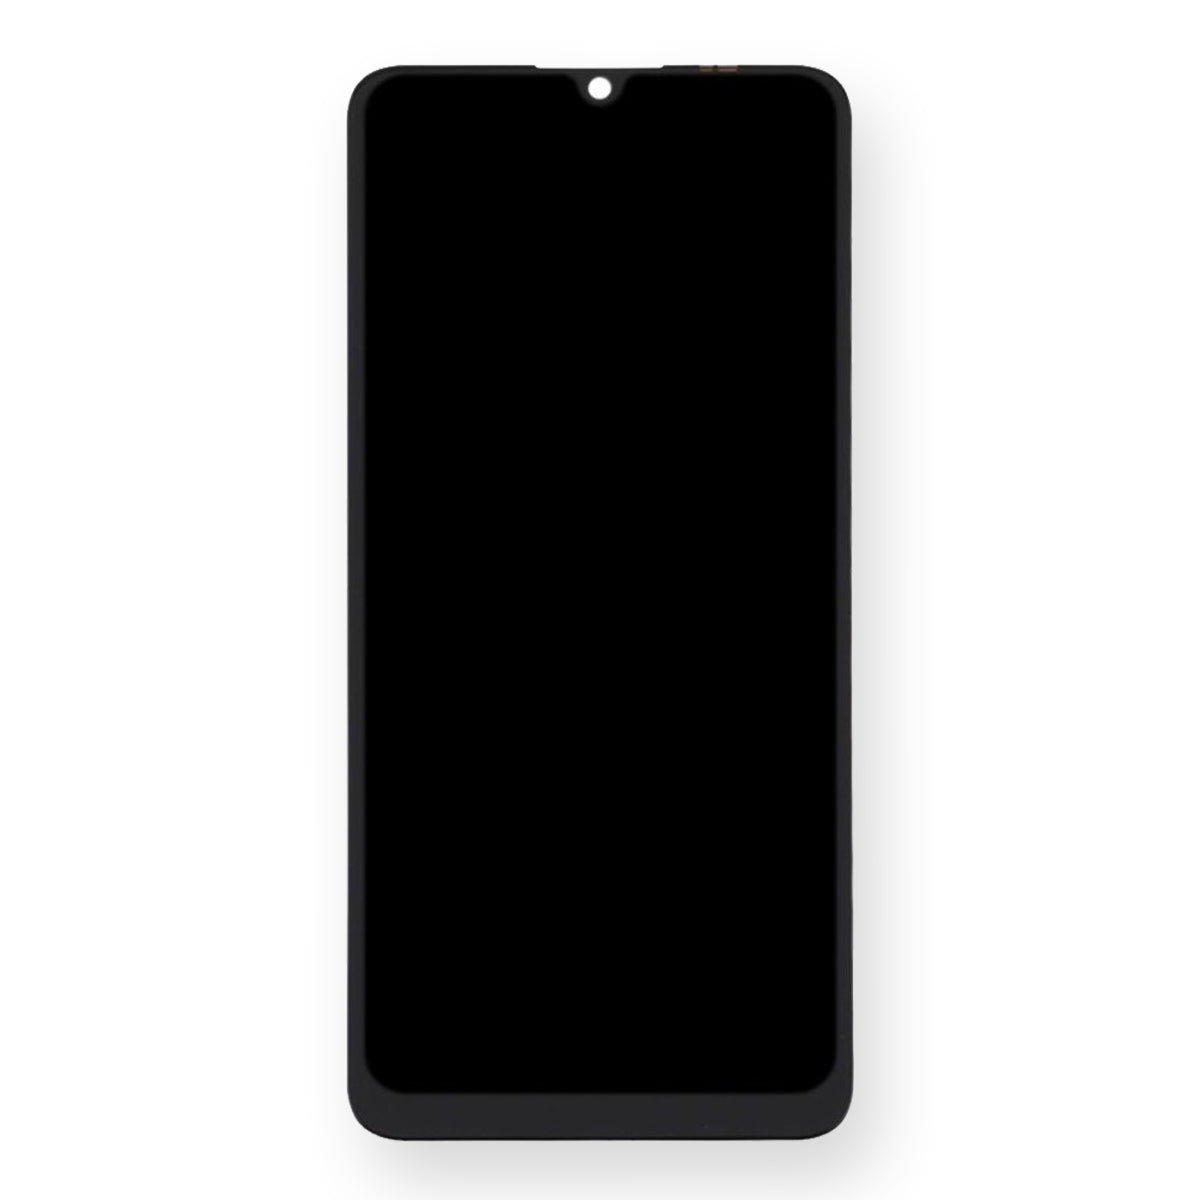 Display Schermo Lcd Huawei Y6P 2020 MED-LX9 MED-LX9N Touch Screen Vetro Nero